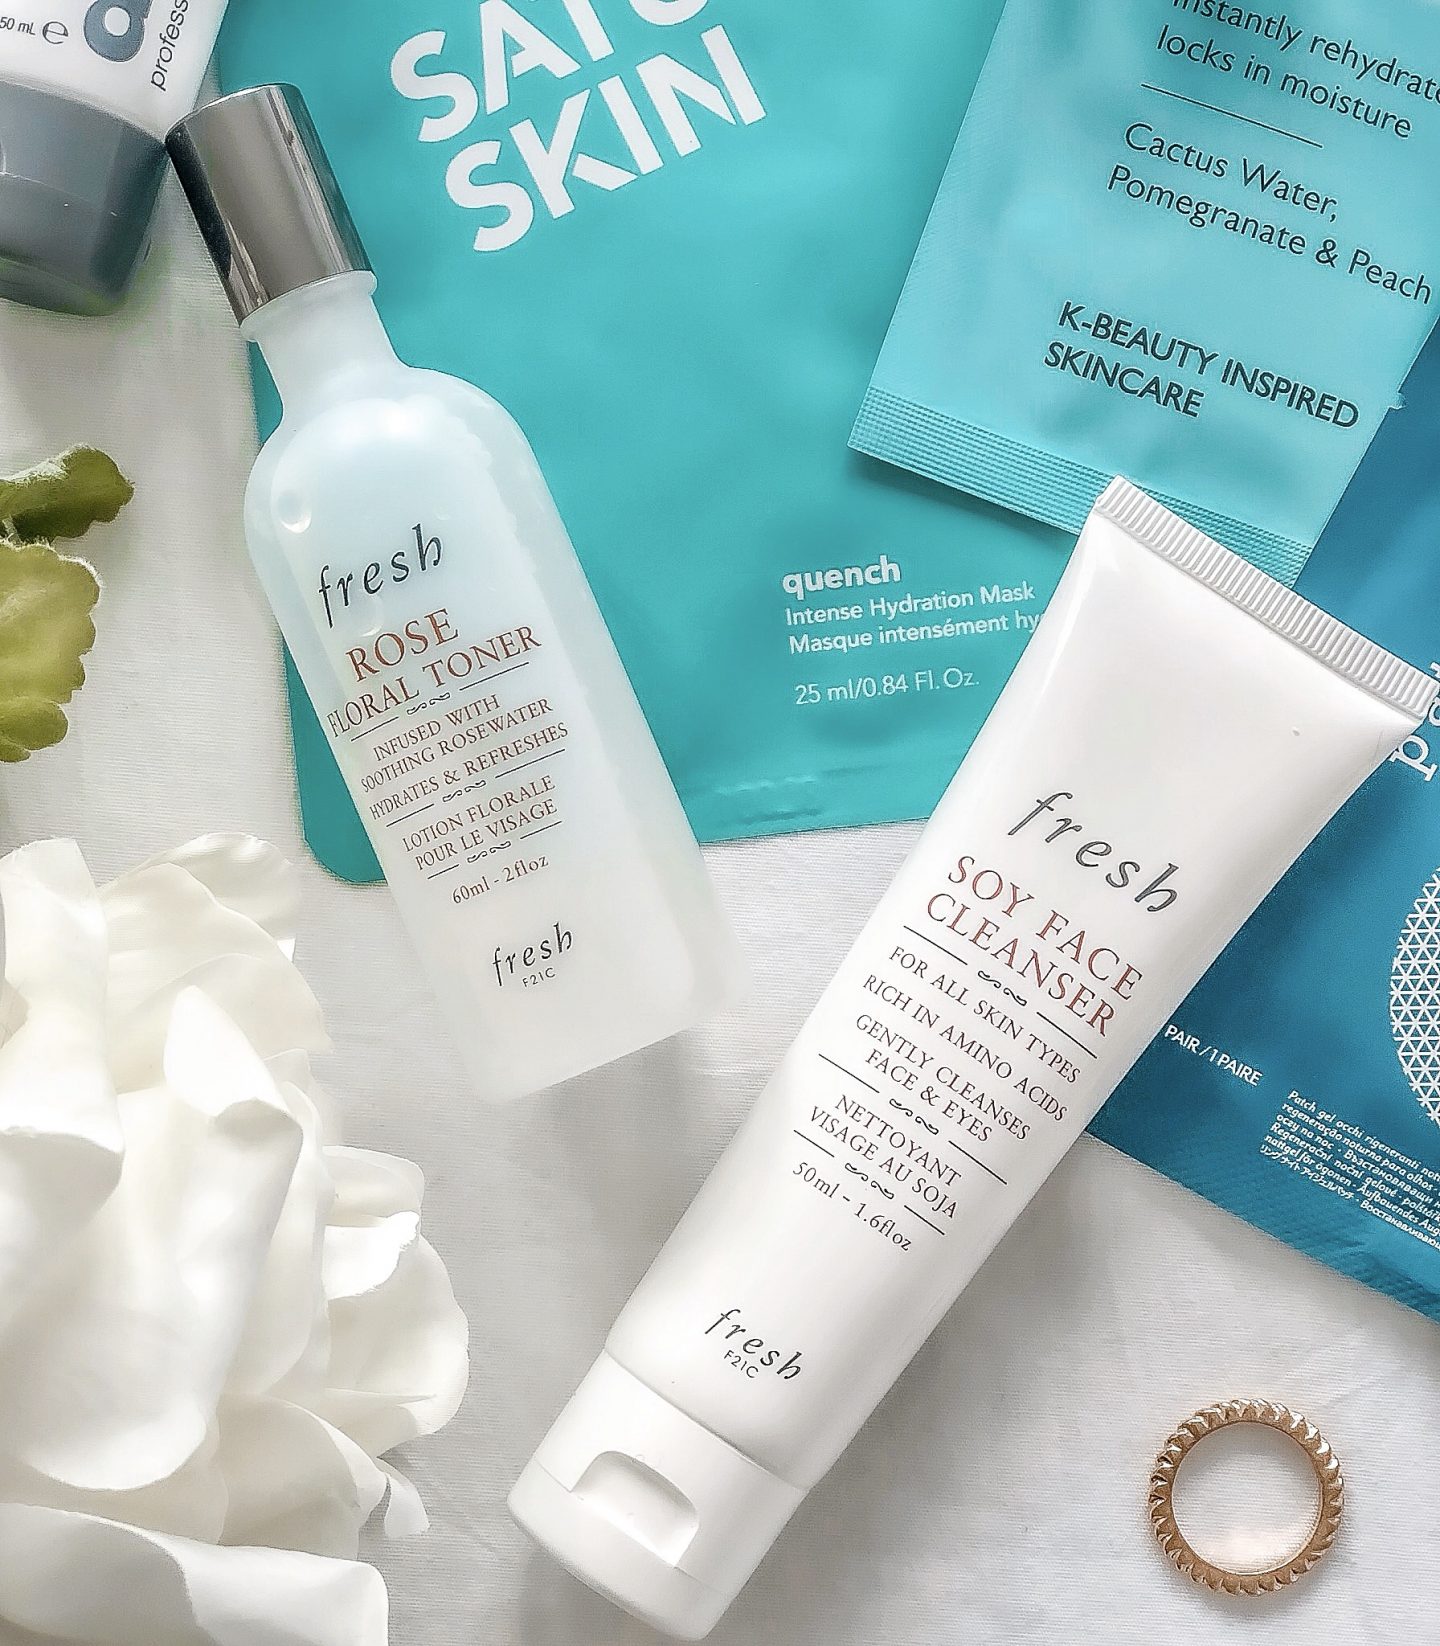 Products for hydrating skin